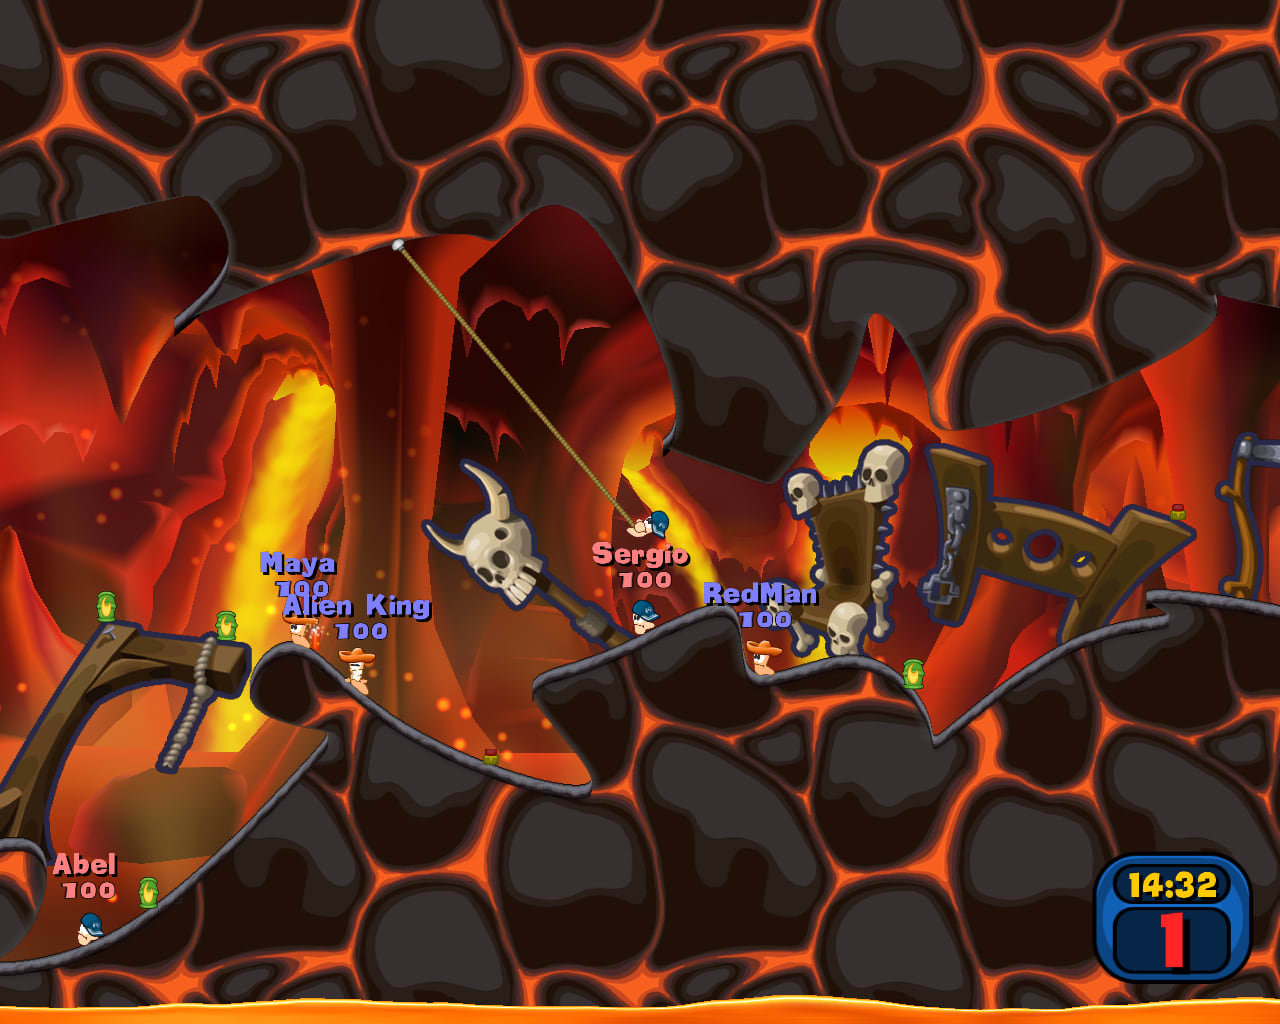 worms reloaded download free